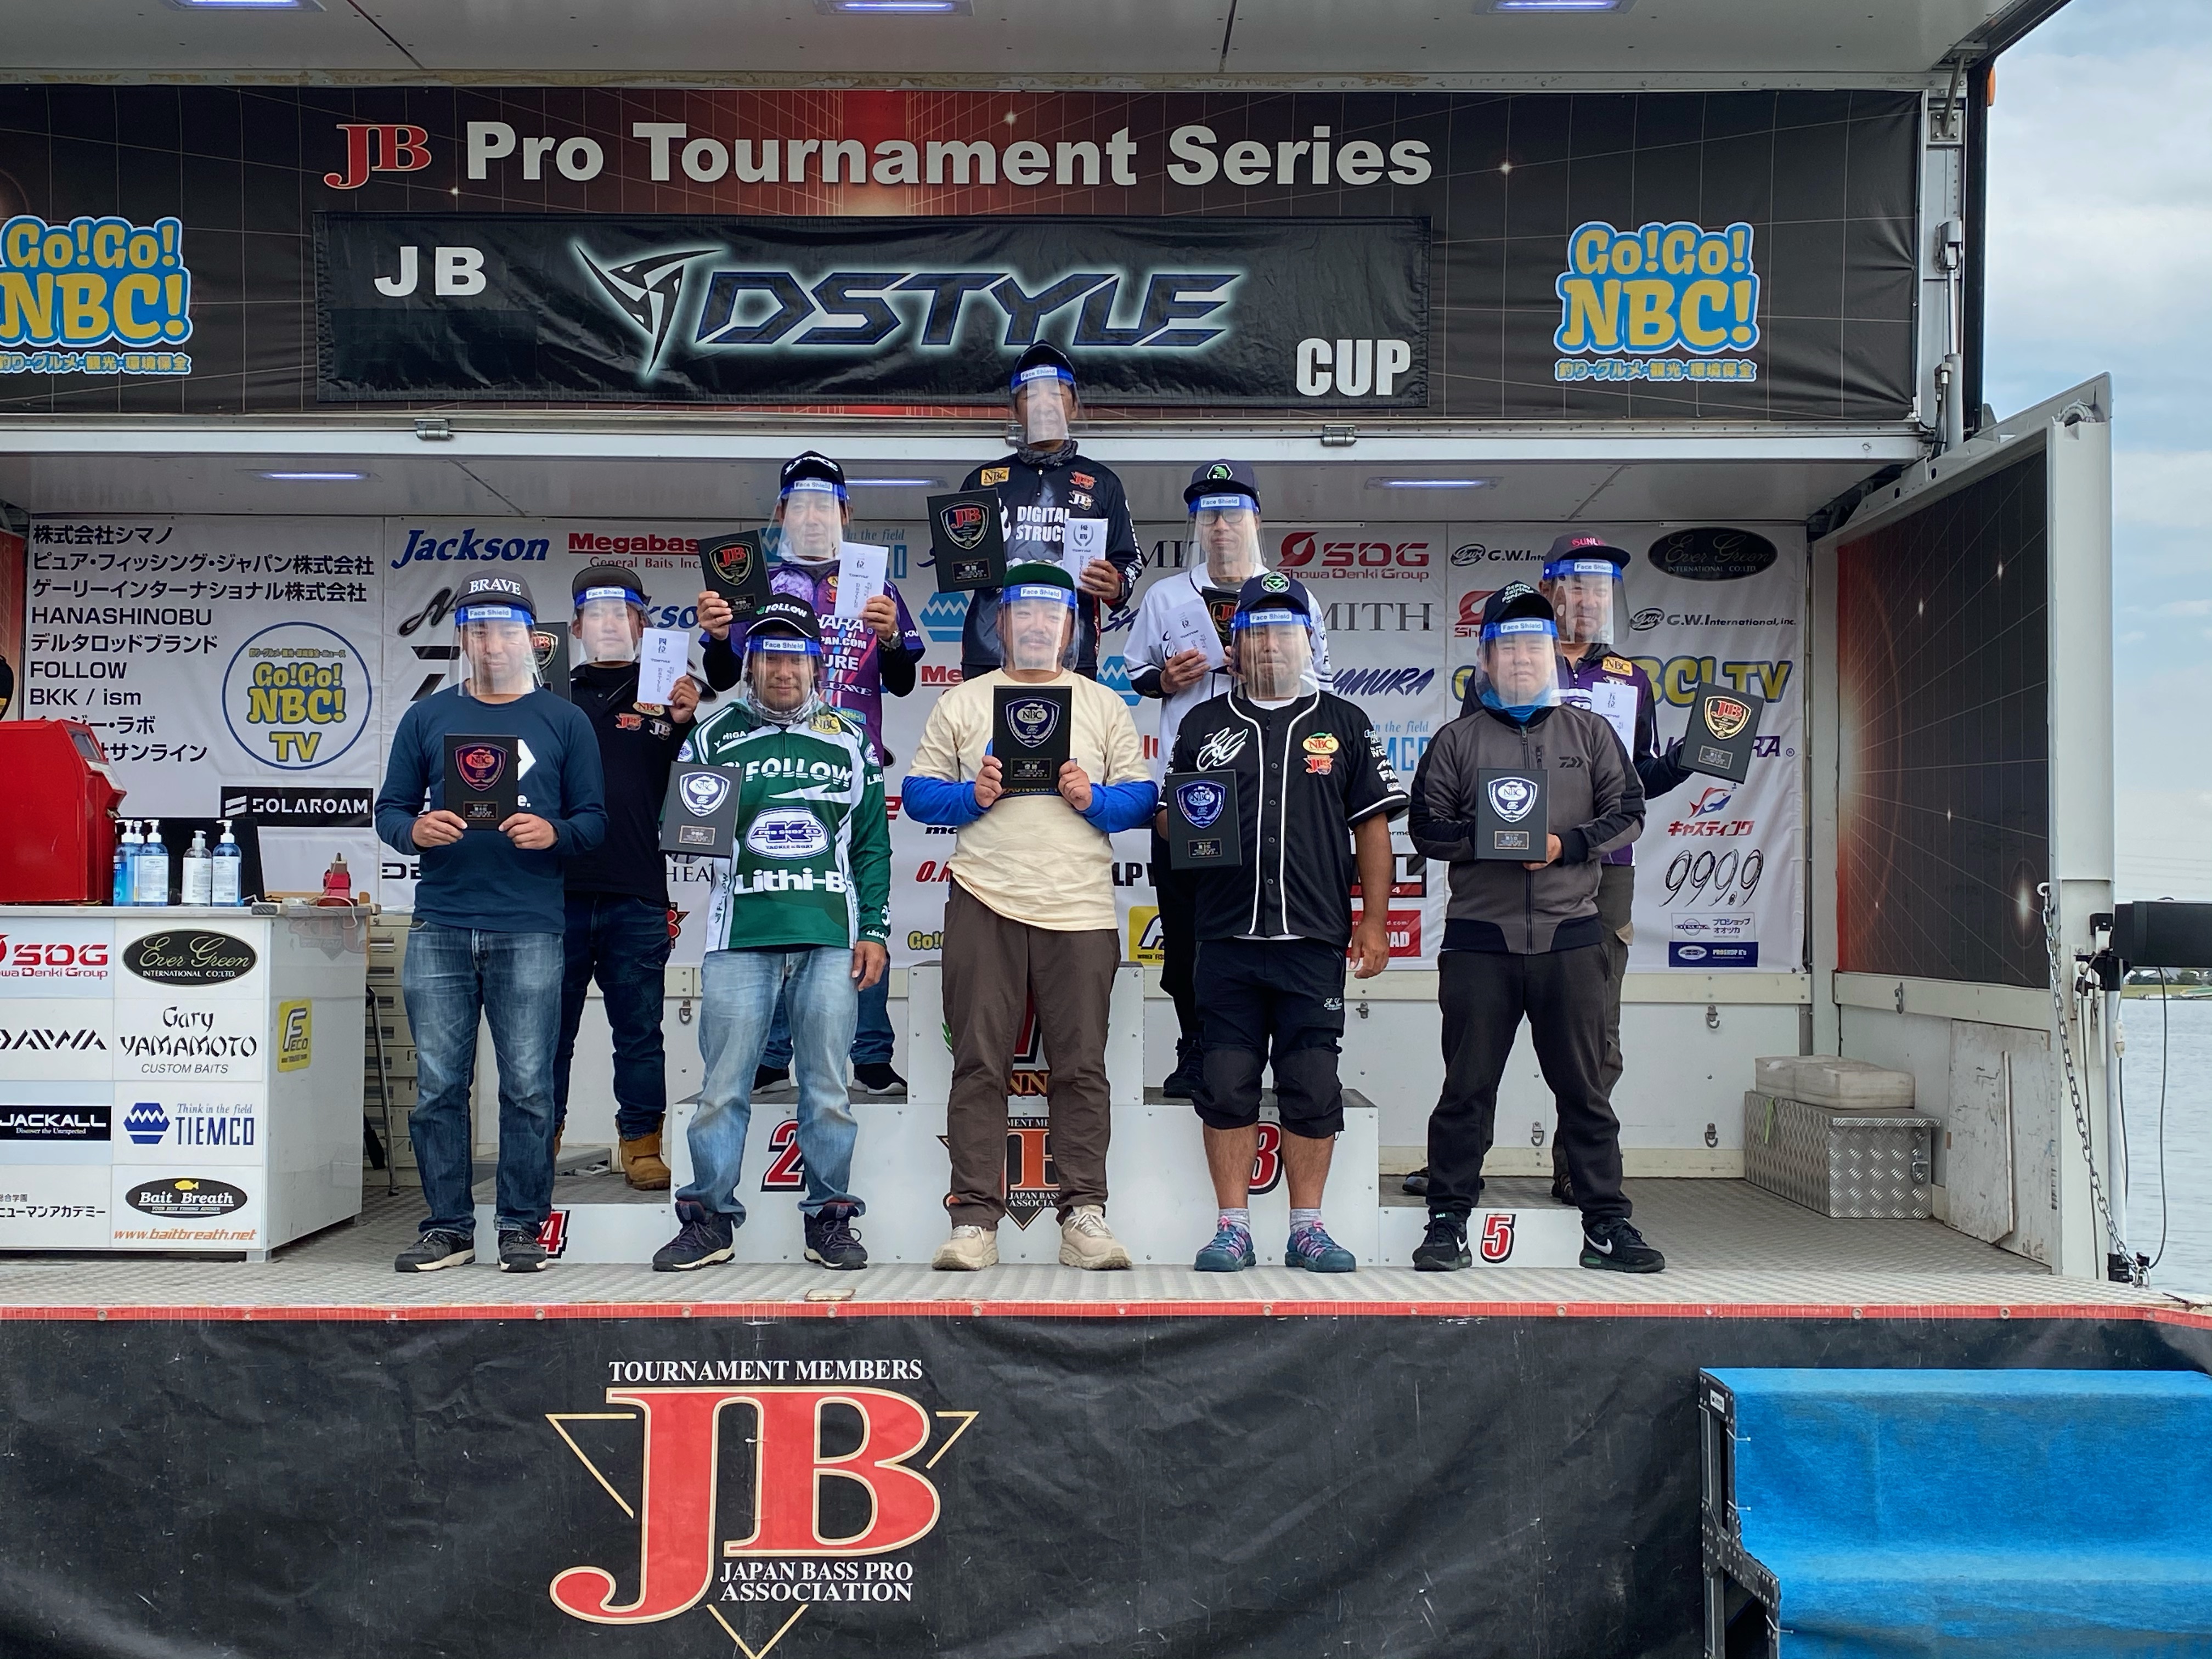 JBII霞ヶ浦 第２戦 DSTYLE CUP